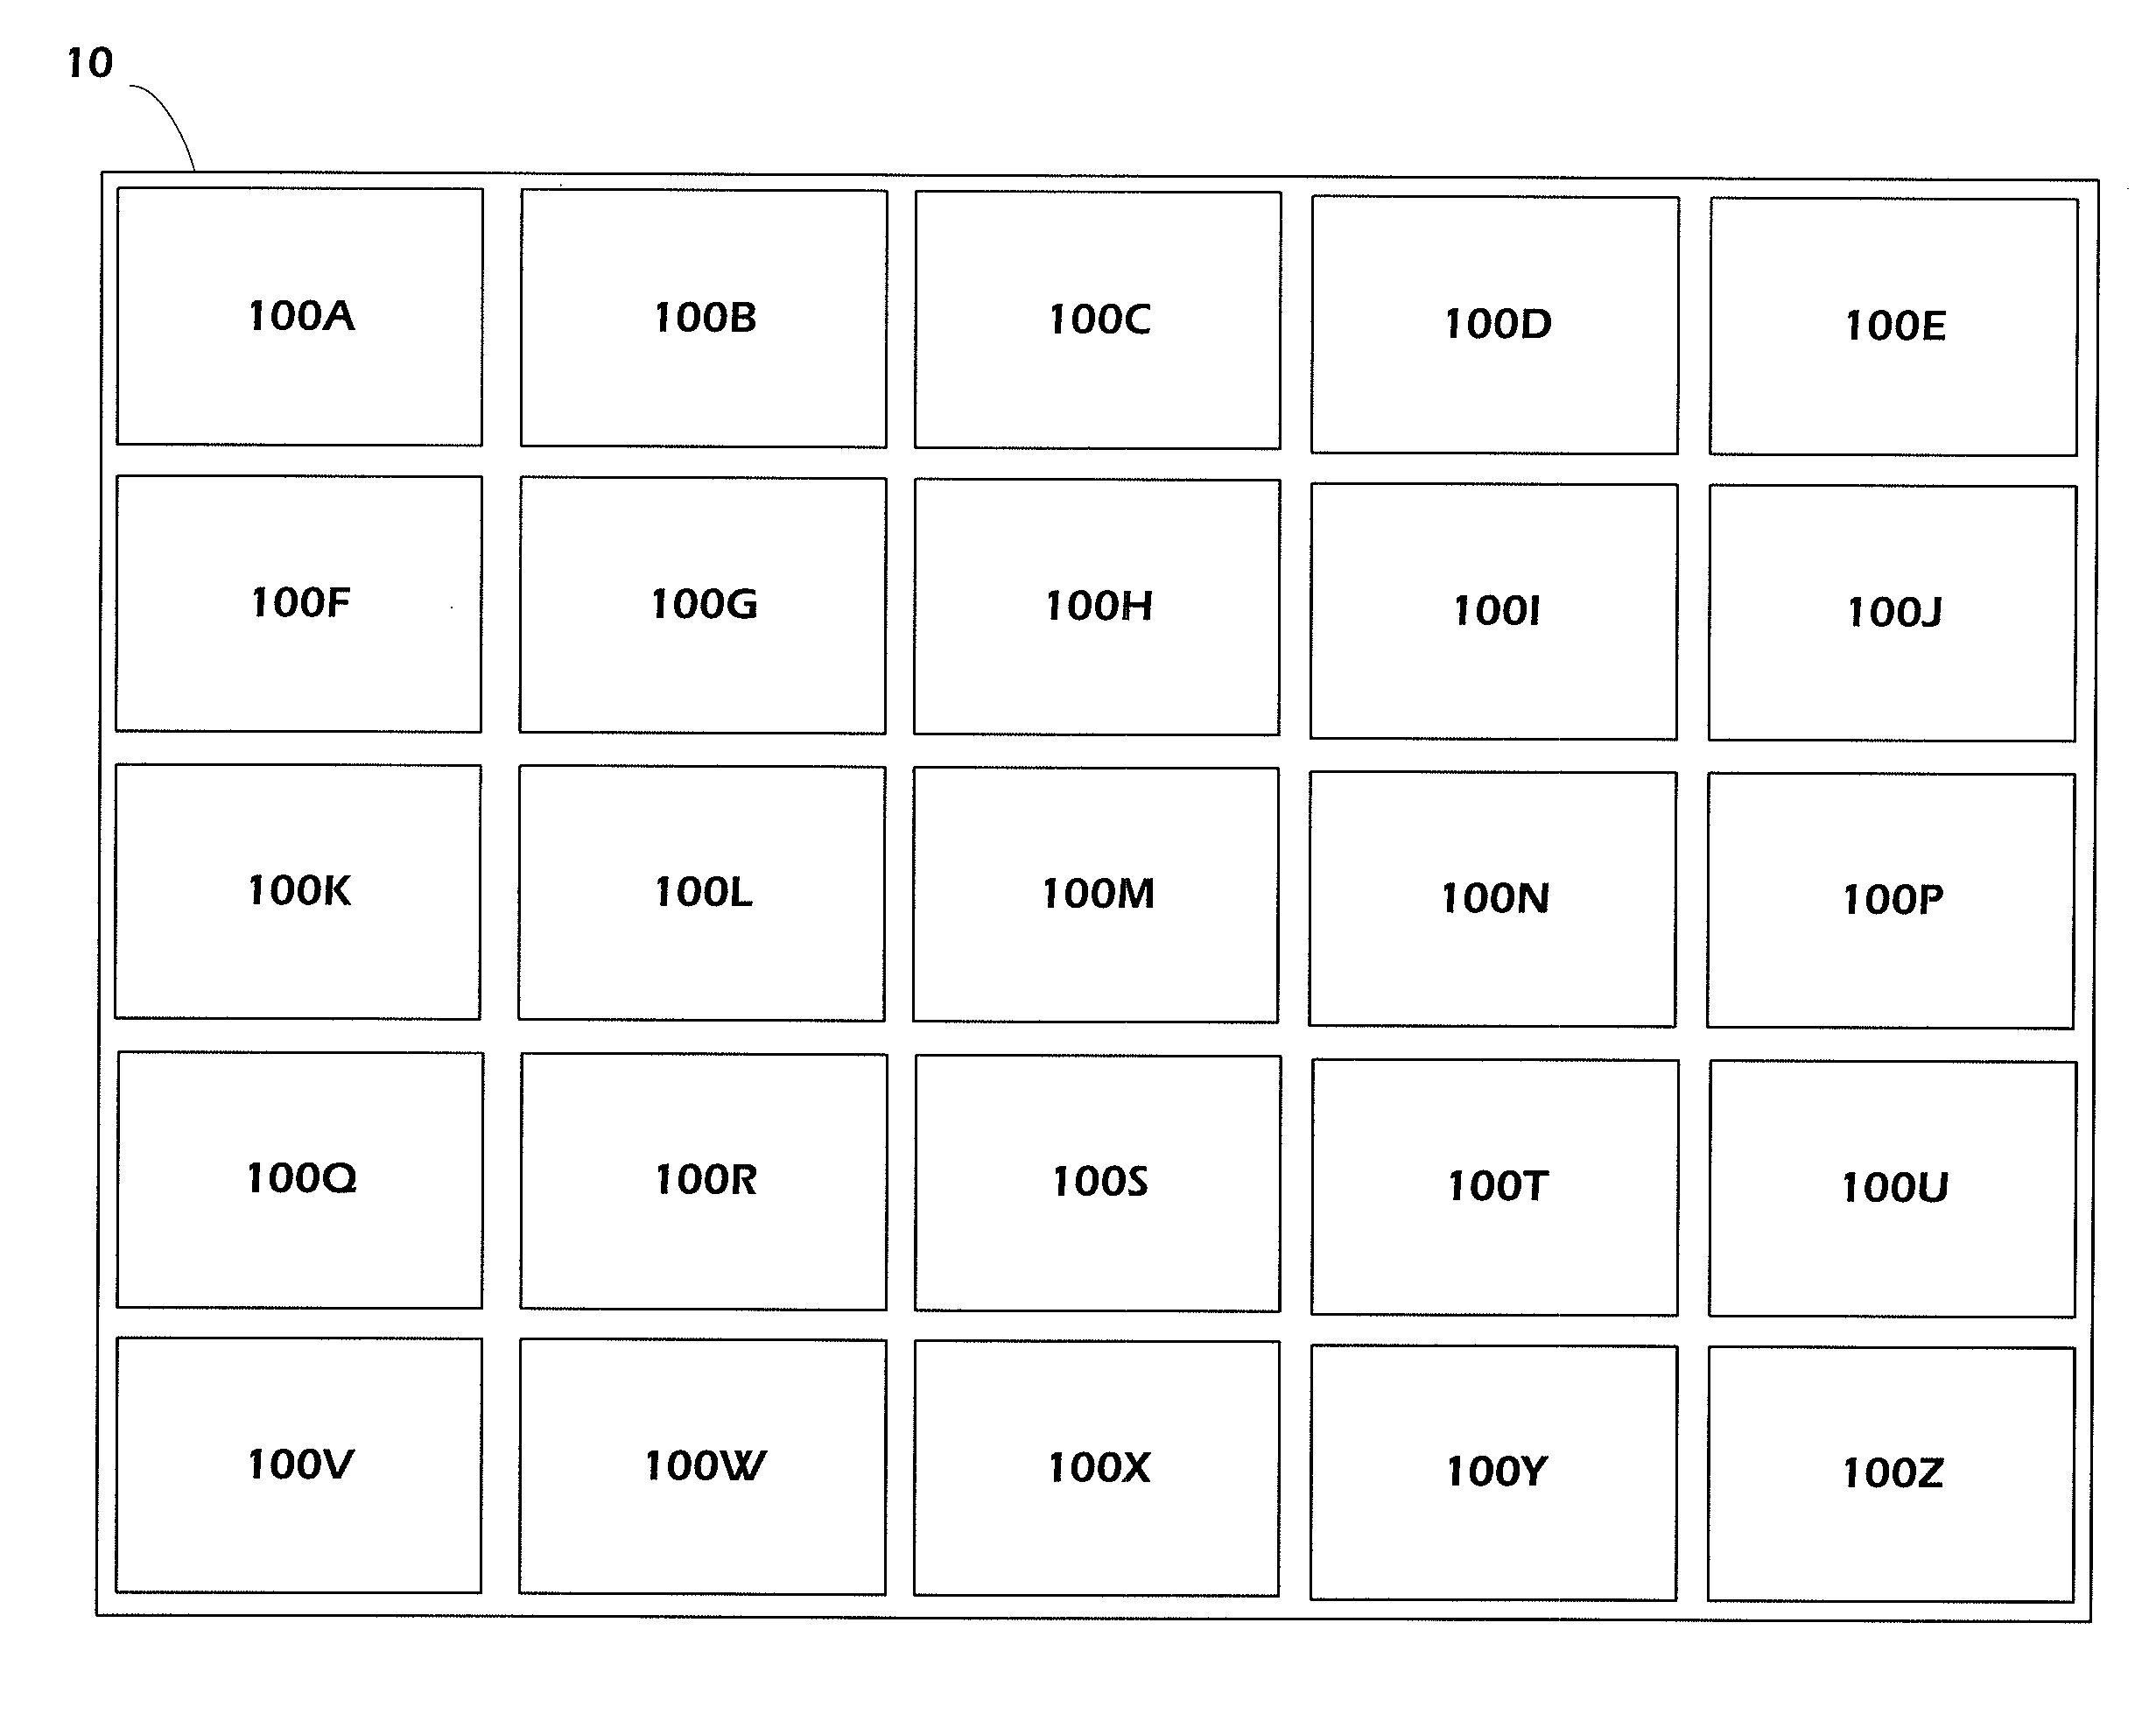 Systems, methods, and devices for highly interactive large image display and manipulation on tiled displays